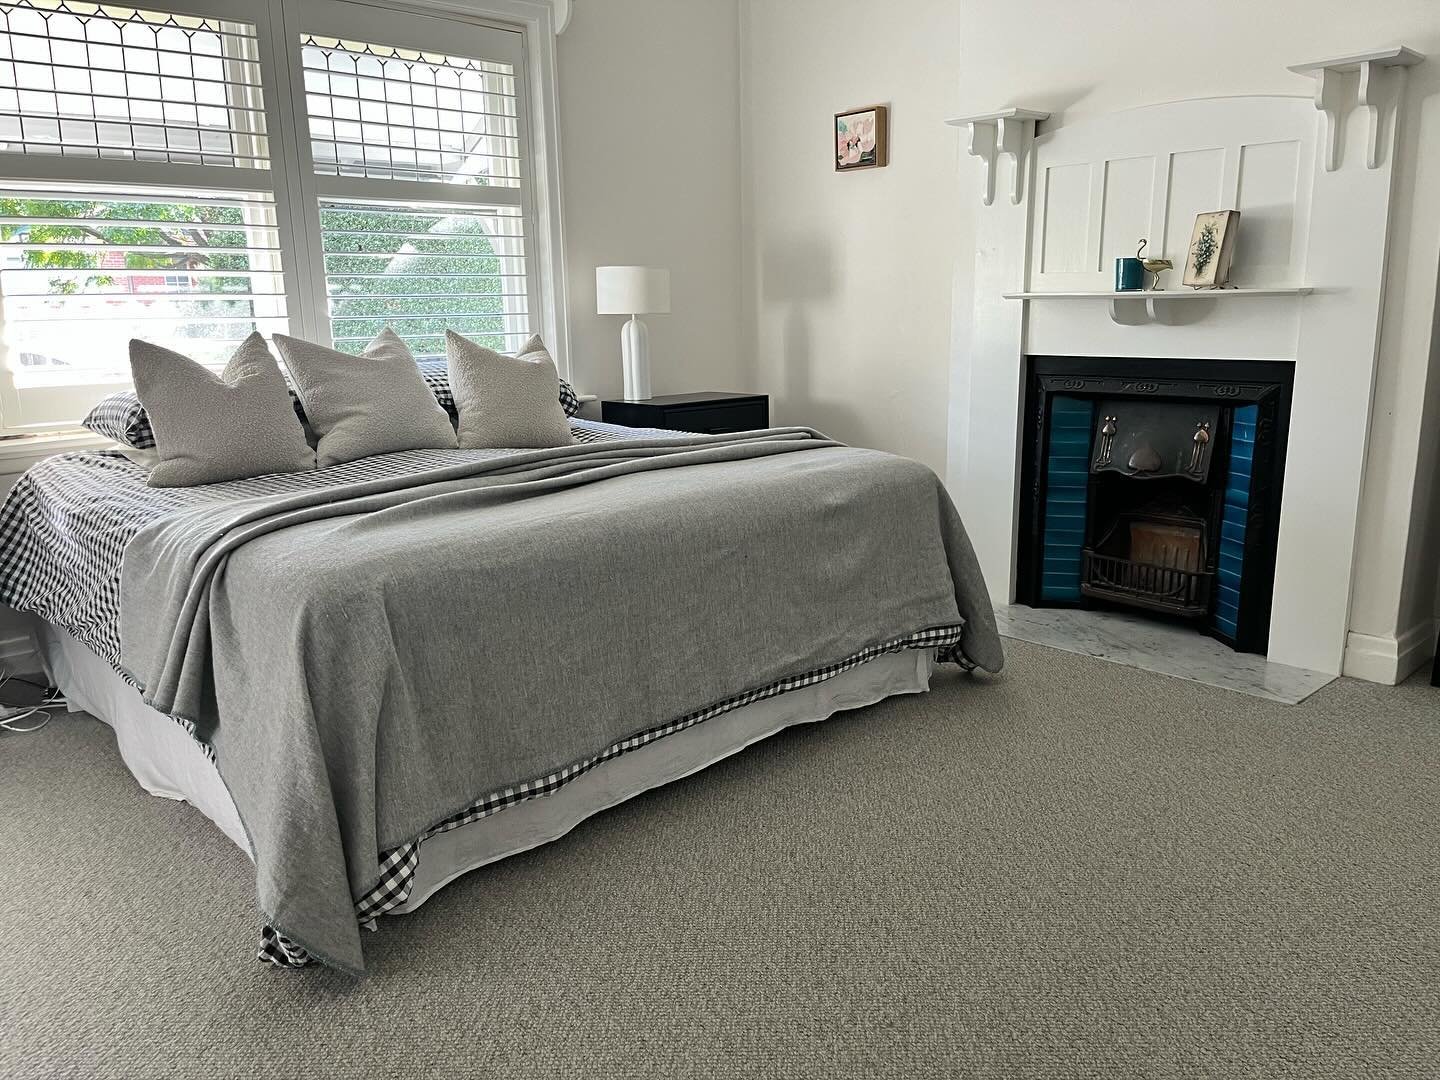 FRIDAY LOVE 💕 RIPPLES for your bedroom carpet 100% NZ wool carpet in colour TEKAPO 
by @bremworth SUPPLY &amp; INSTALL by Floorworld Camberwell. Home of premium quality flooring. #flooring #carpet #camberwell #flooringshowroom #quality #luxurydesign